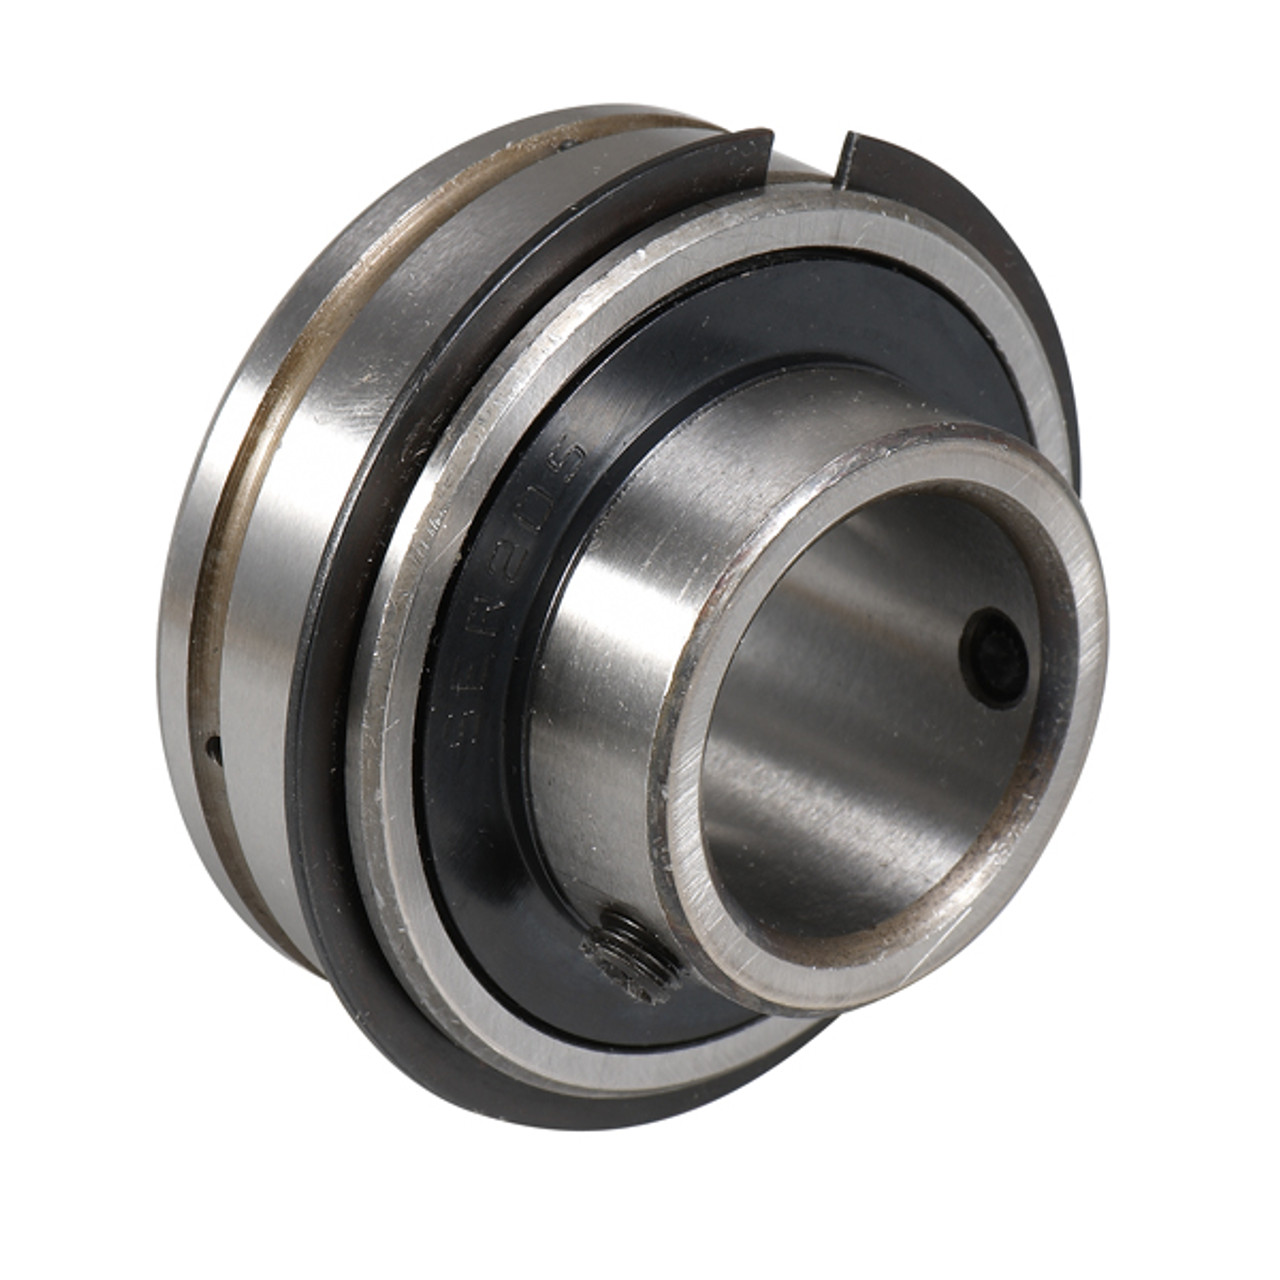 SER208-24 GENERIC 38.1mm Normal duty bearing insert with a parallel outer race and grubscrew locking - Imperial Thumbnail